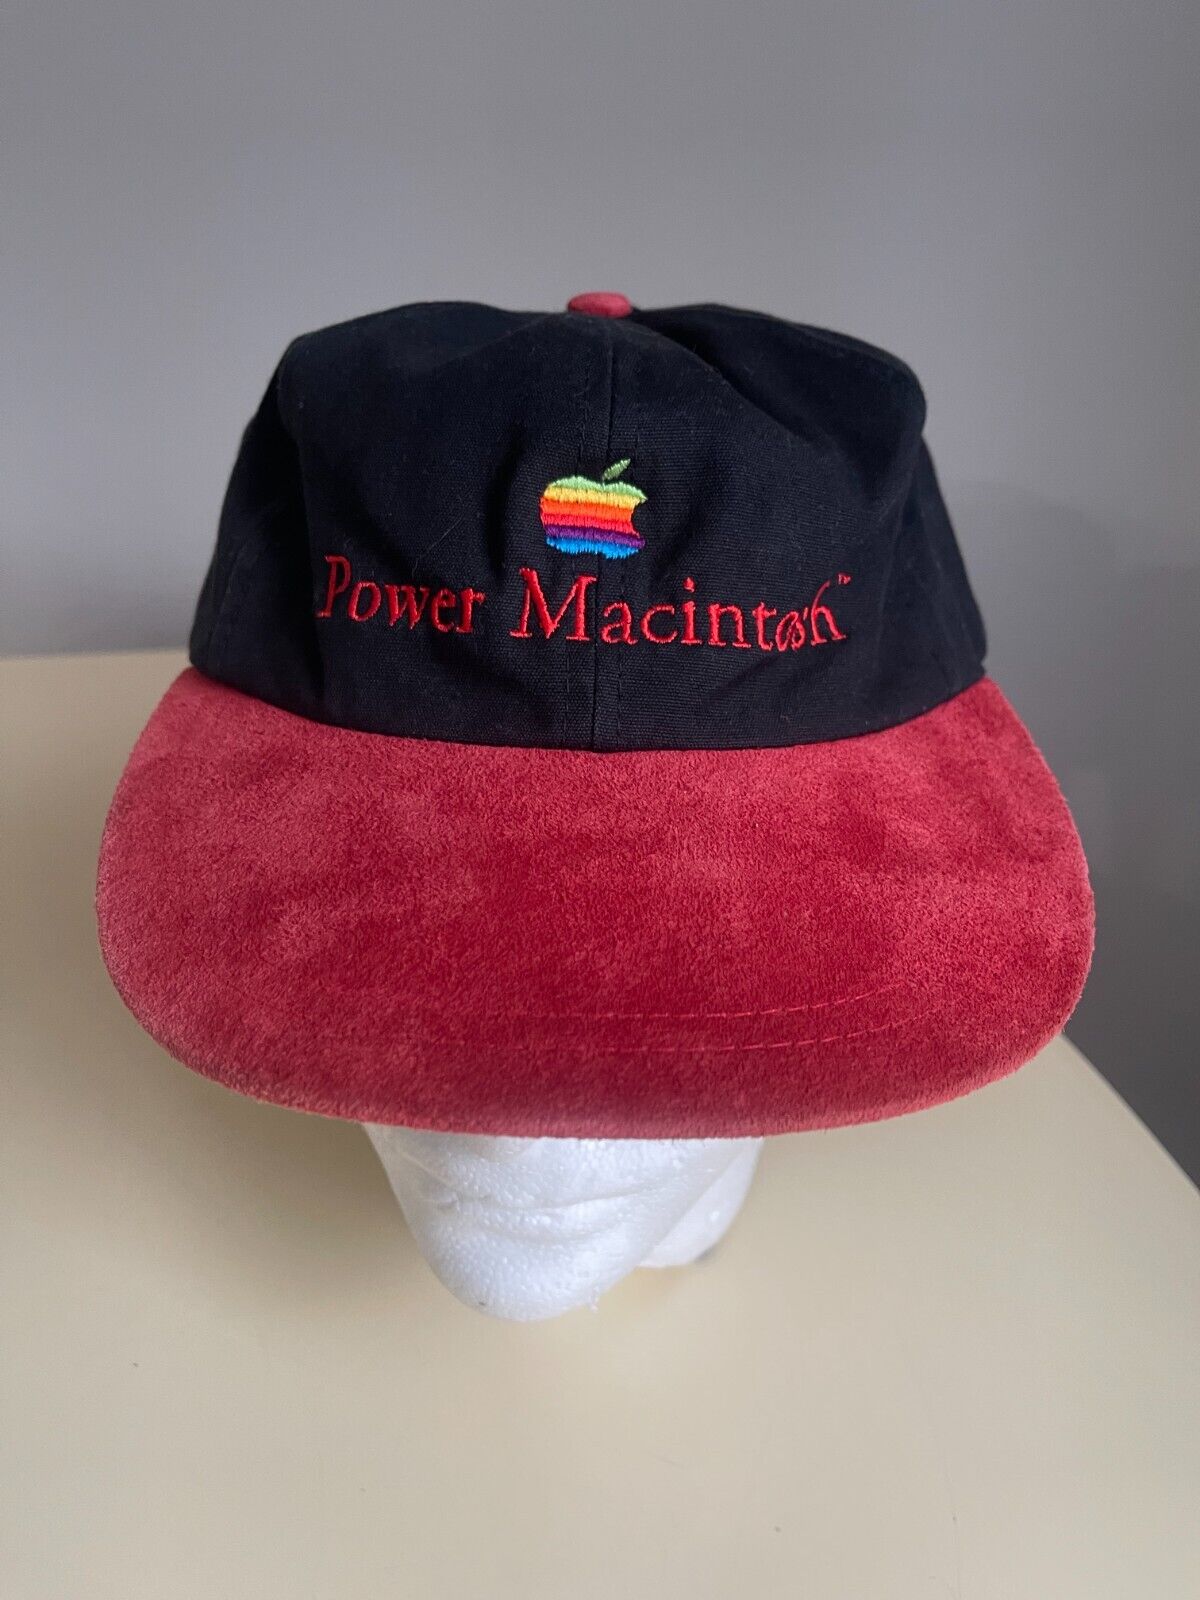 RARE NEW OLD STOCK APPLE COMPUTERS POWER MACINTOSH EARLY LOGO HAT CAP ADJUSTABLE